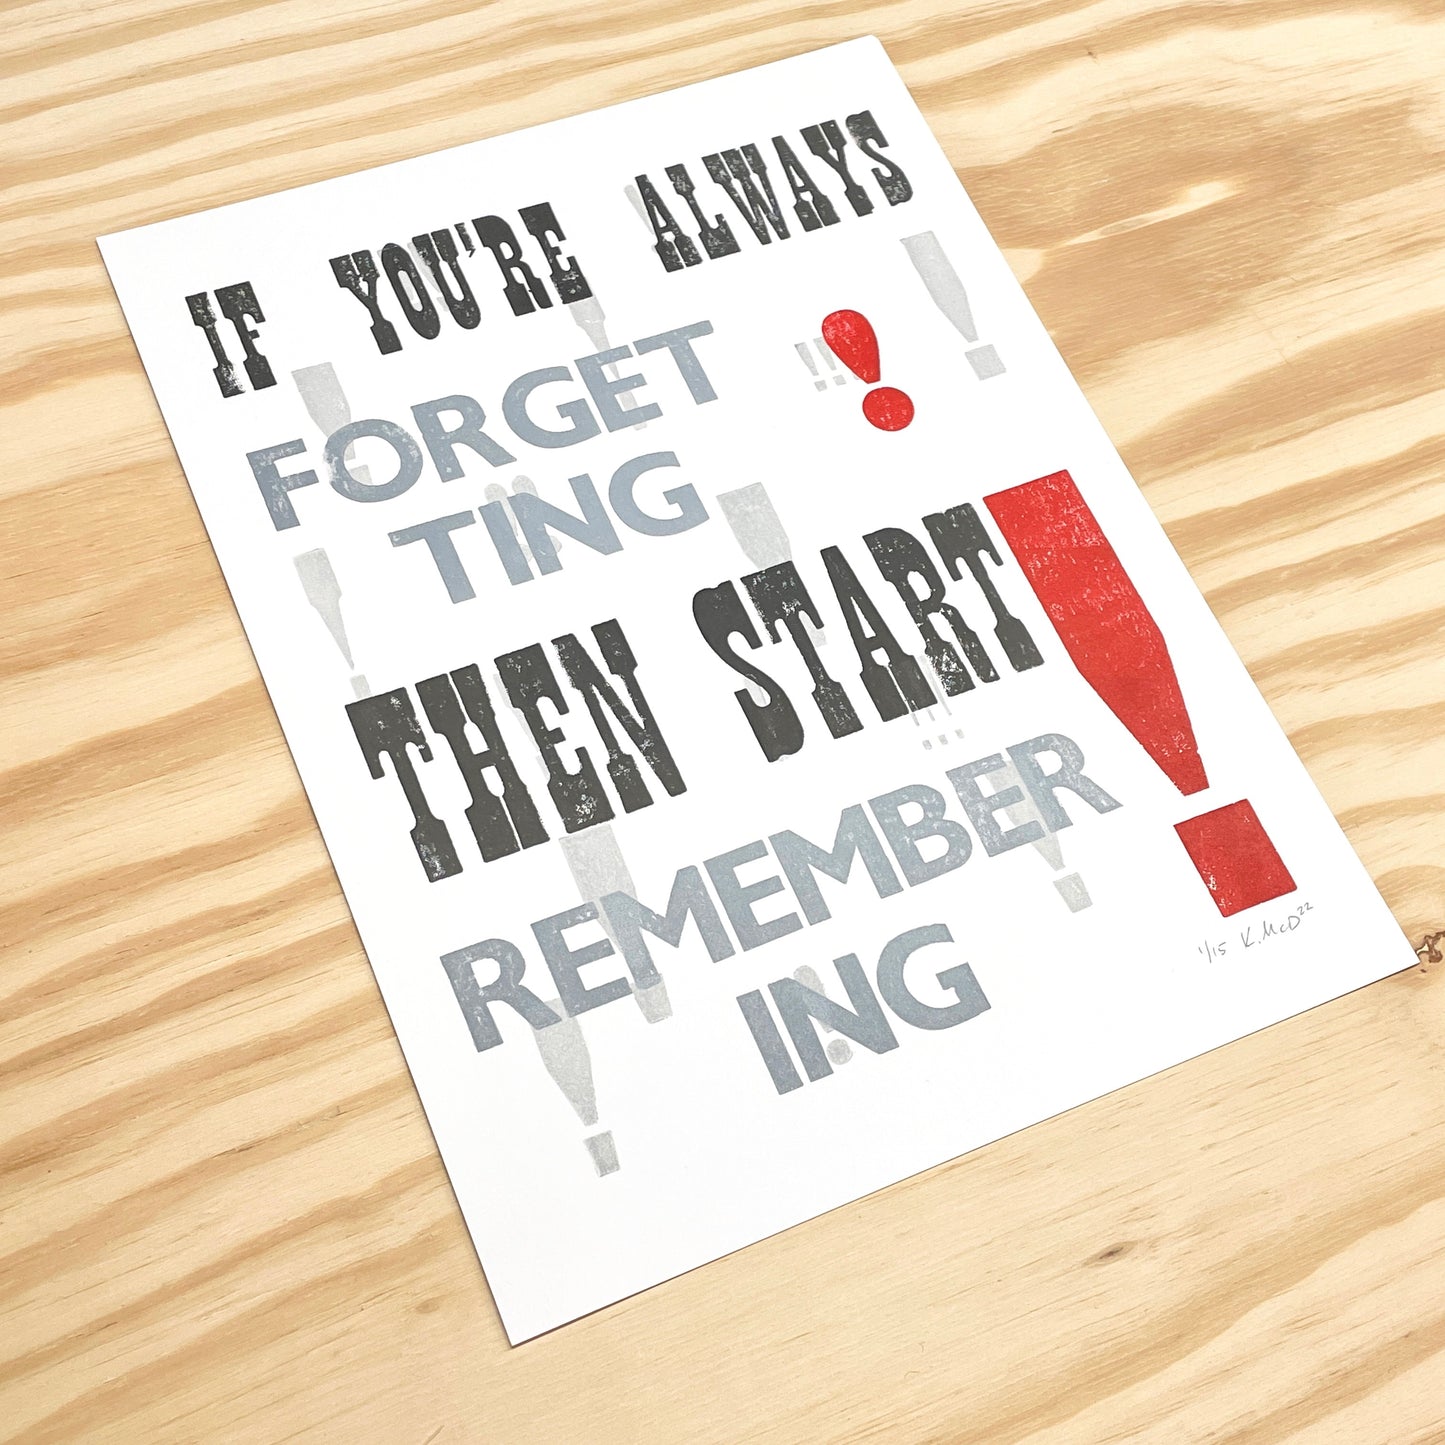 Start Remembering - Wood Type Letterpress Quote (9x12")